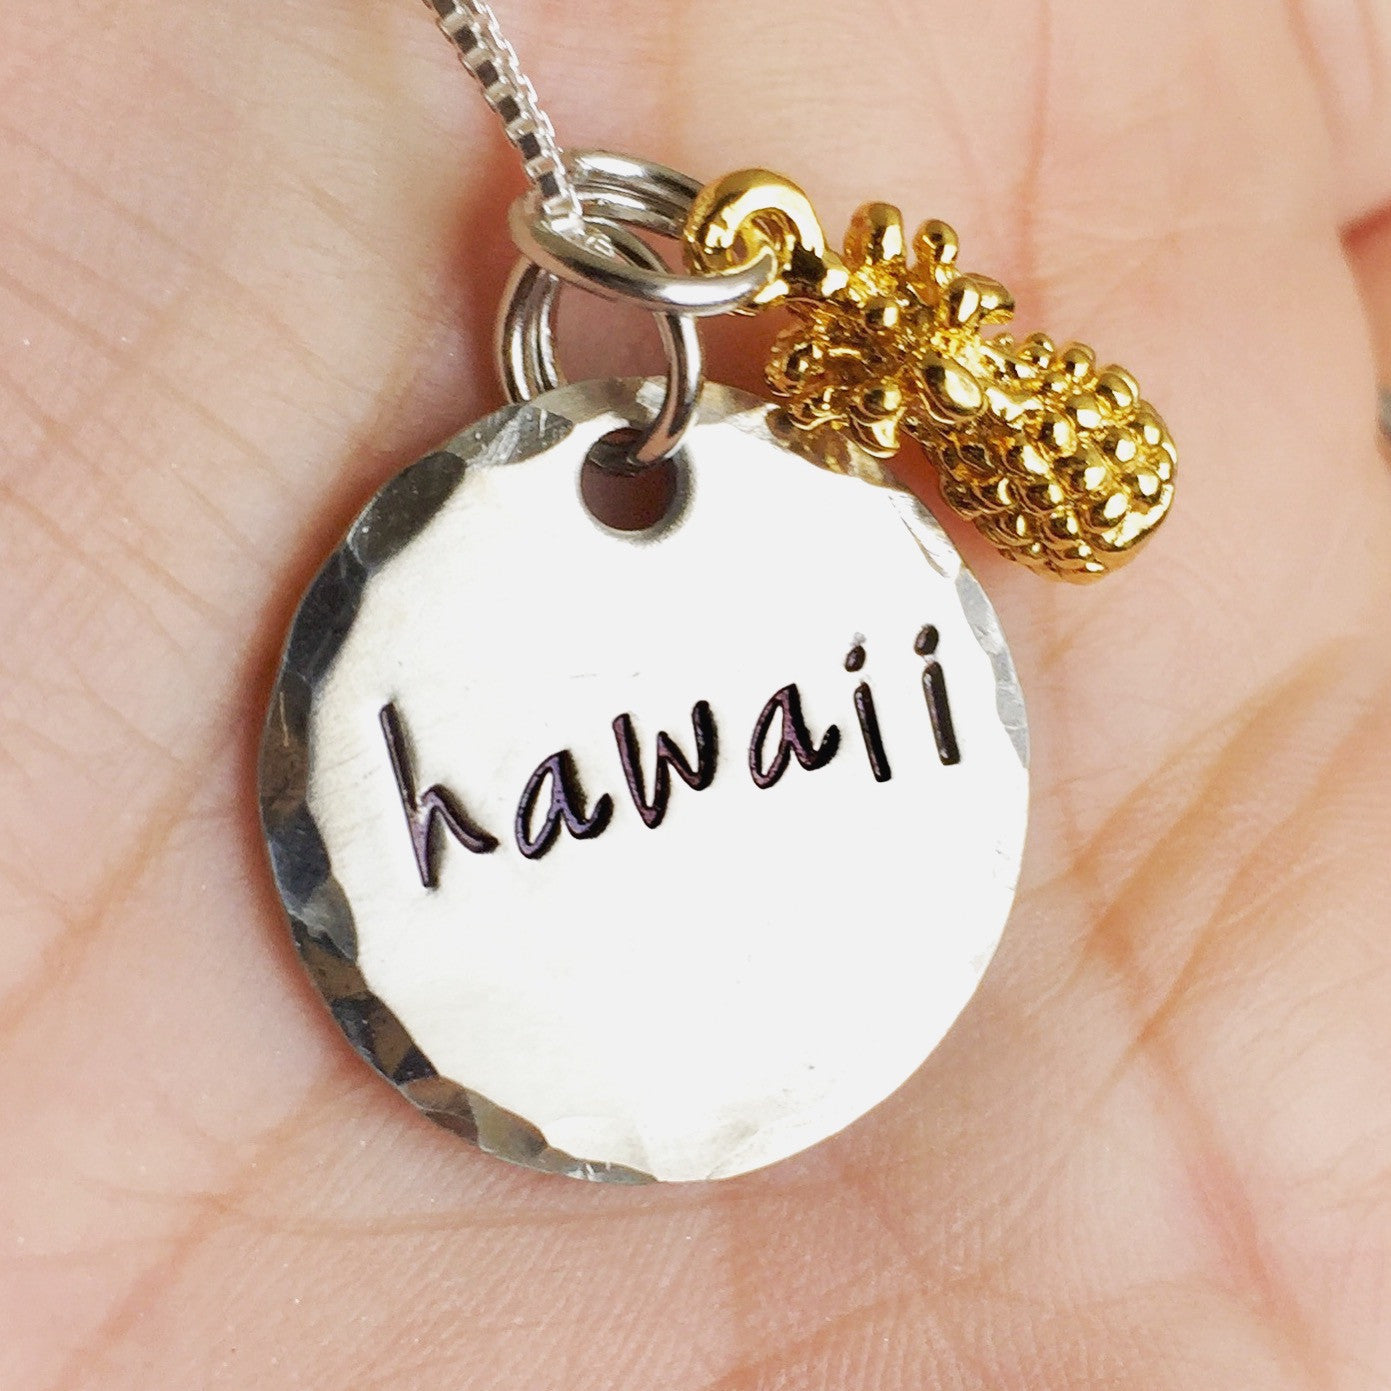 Hawaii Pineapple Necklace, Pineapple Necklace - Natashaaloha, jewelry, bracelets, necklace, keychains, fishing lures, gifts for men, charms, personalized, 